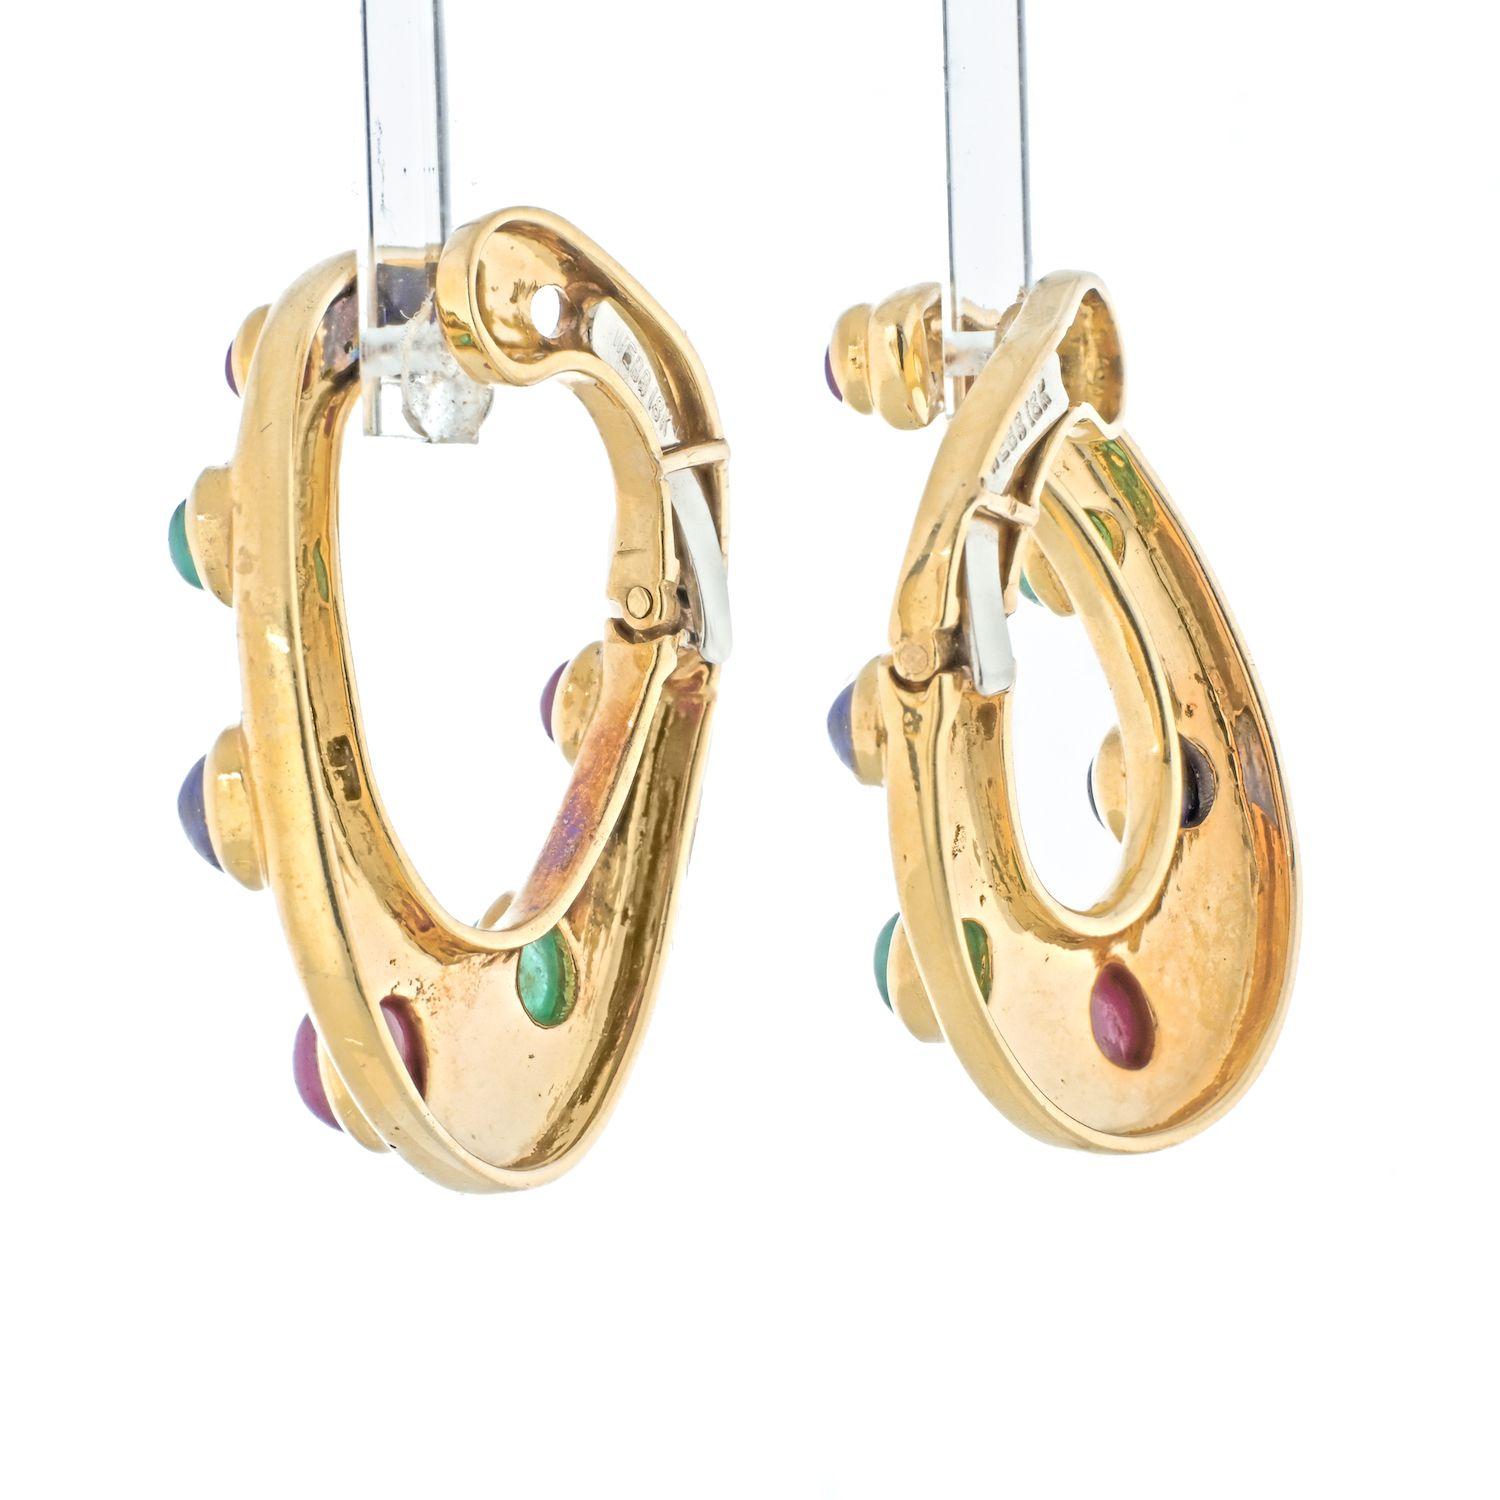 Oval Cut David Webb 18K Yellow Gold Oval Shaped Sapphires, Emeralds and Rubies Earrings